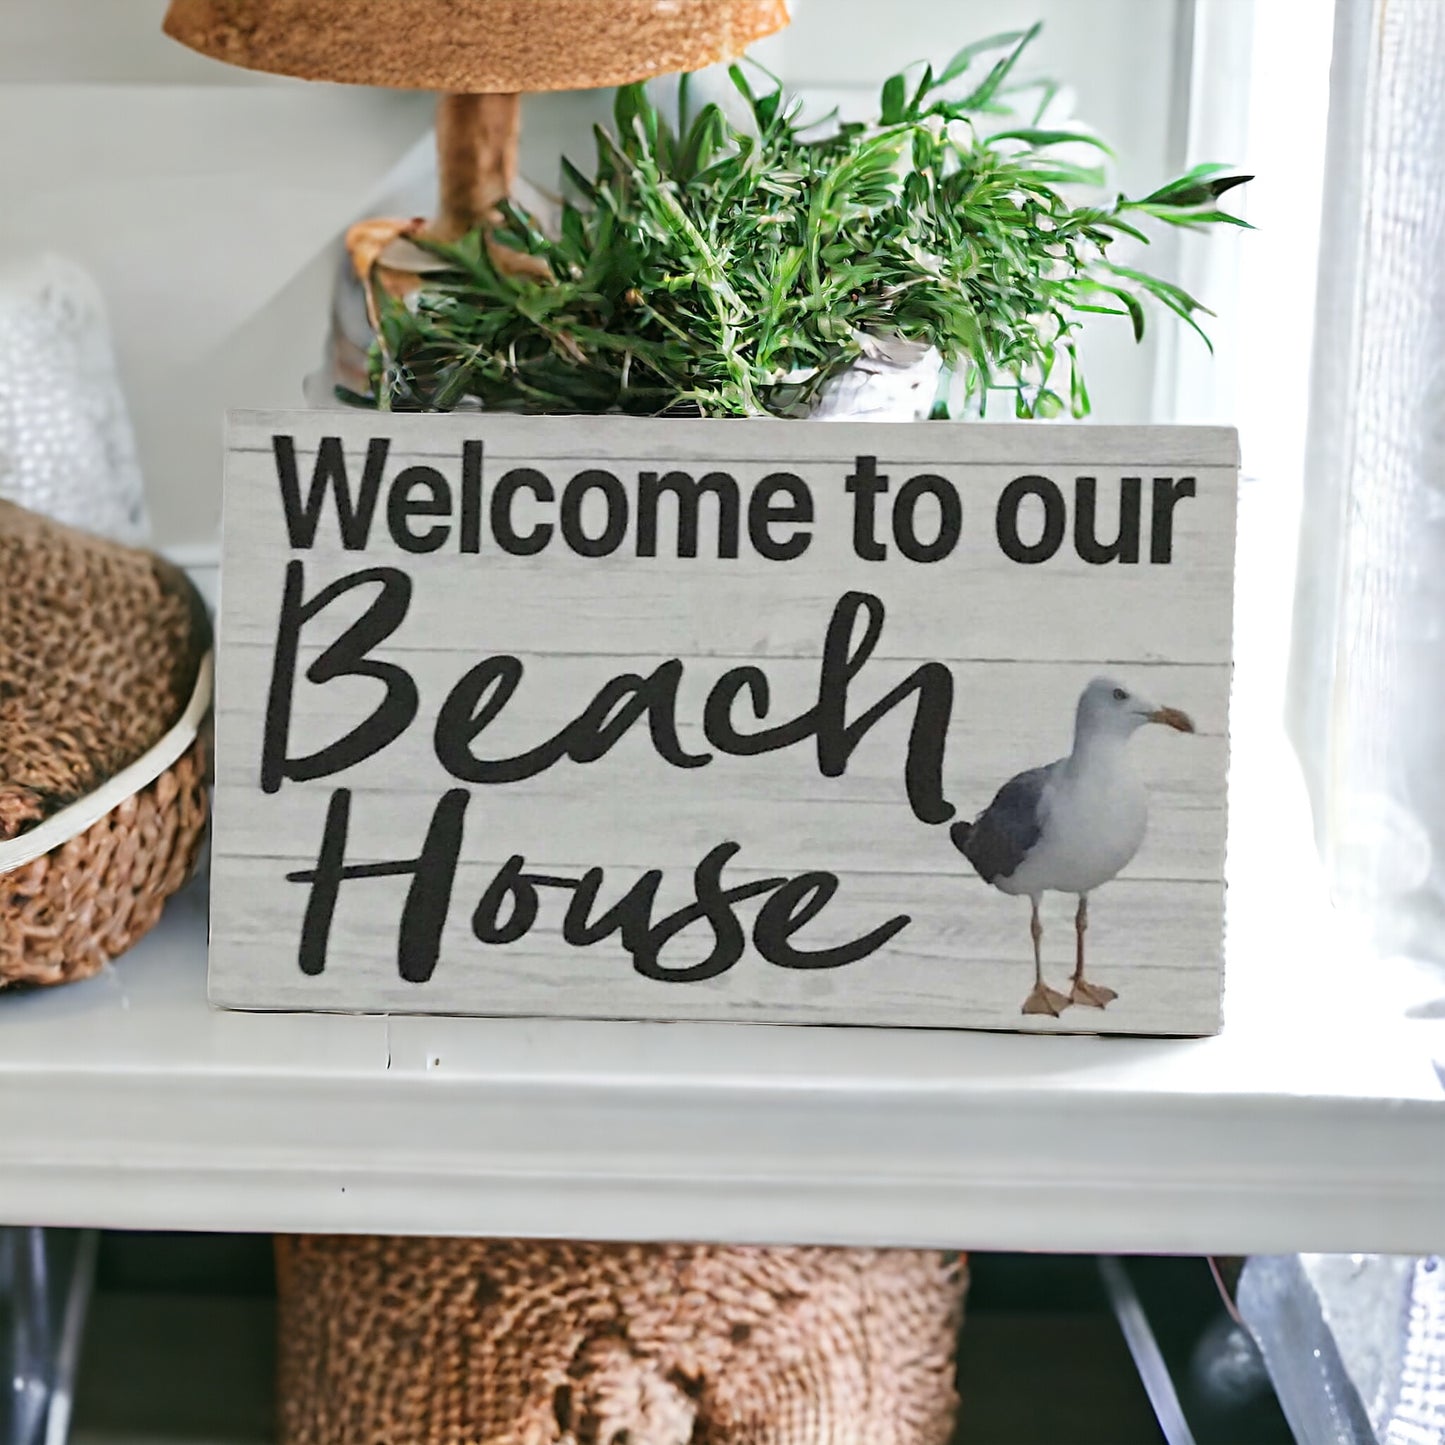 Beach House with Seagull Sign - The Renmy Store Homewares & Gifts 